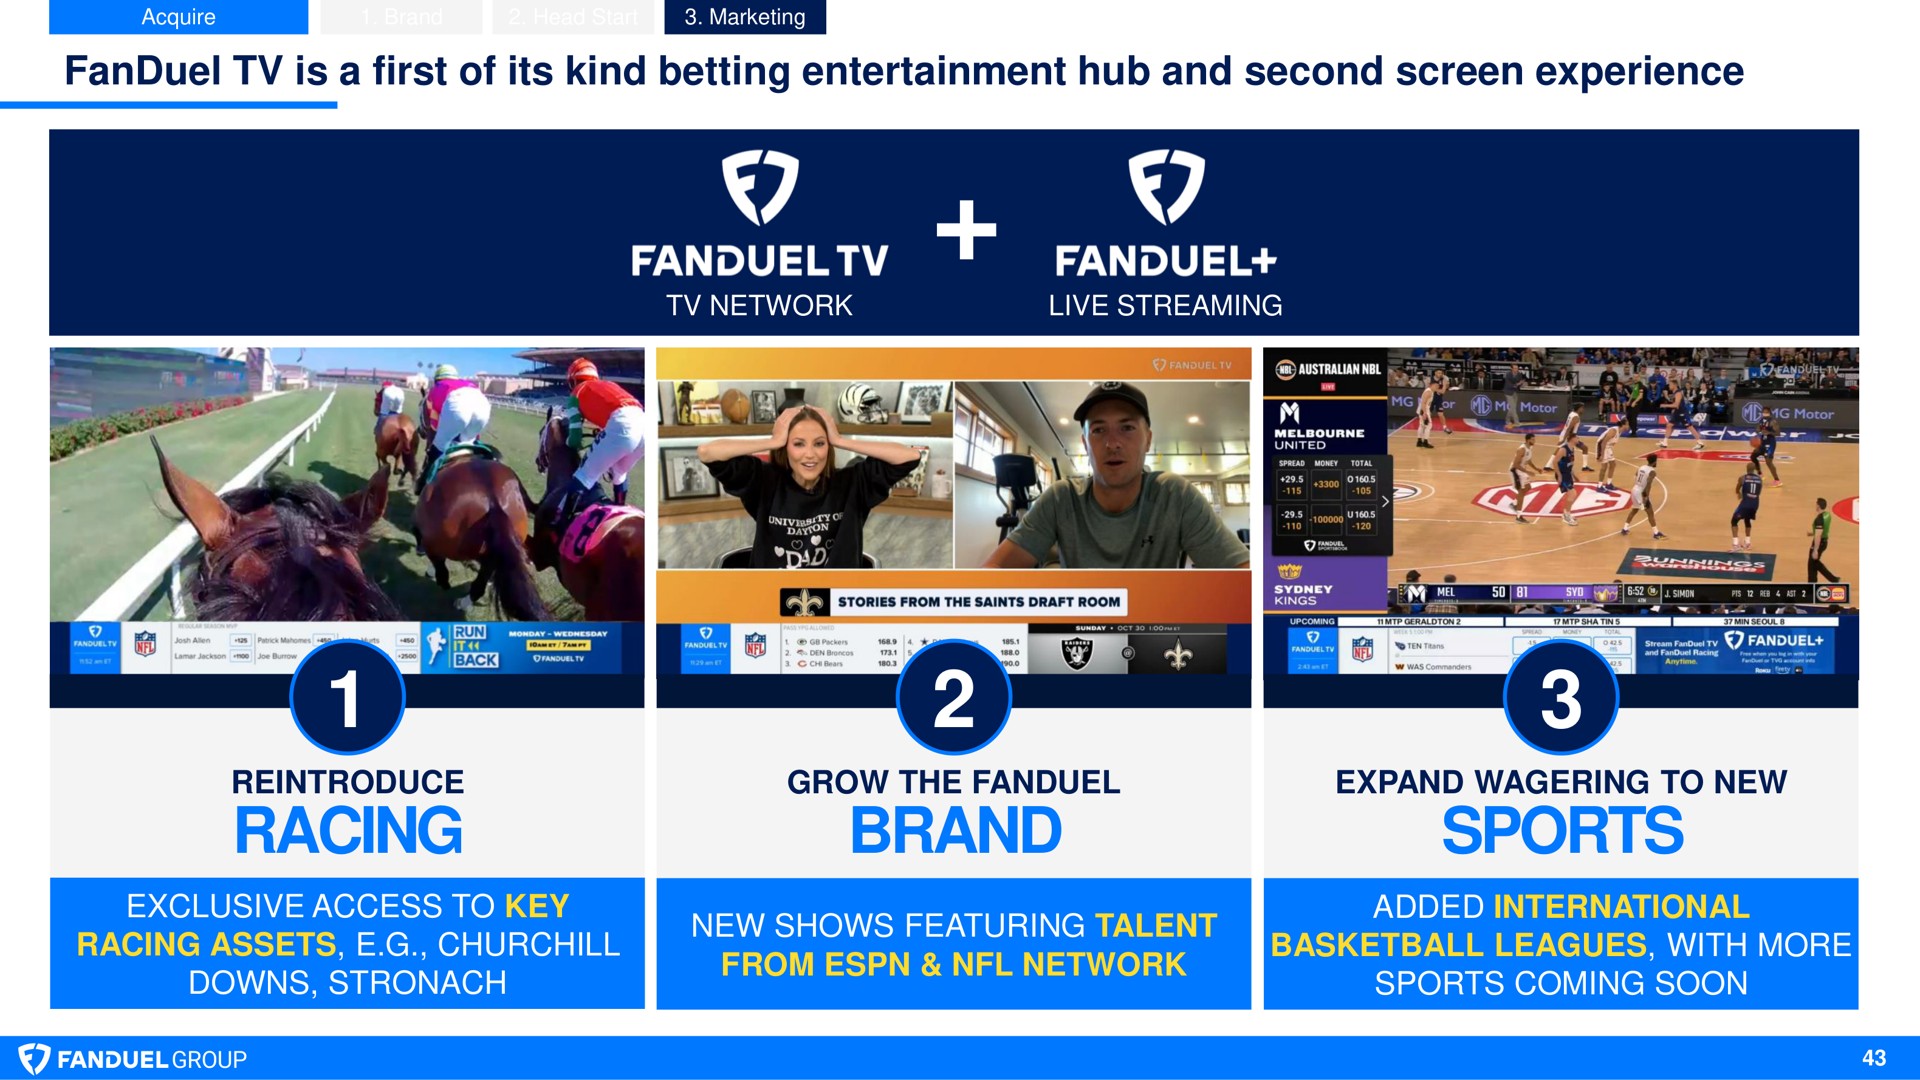 is a first of its kind betting entertainment hub and second screen experience racing brand sports network live streaming coming soon assets downs basketball leagues with more nasal toa | Flutter